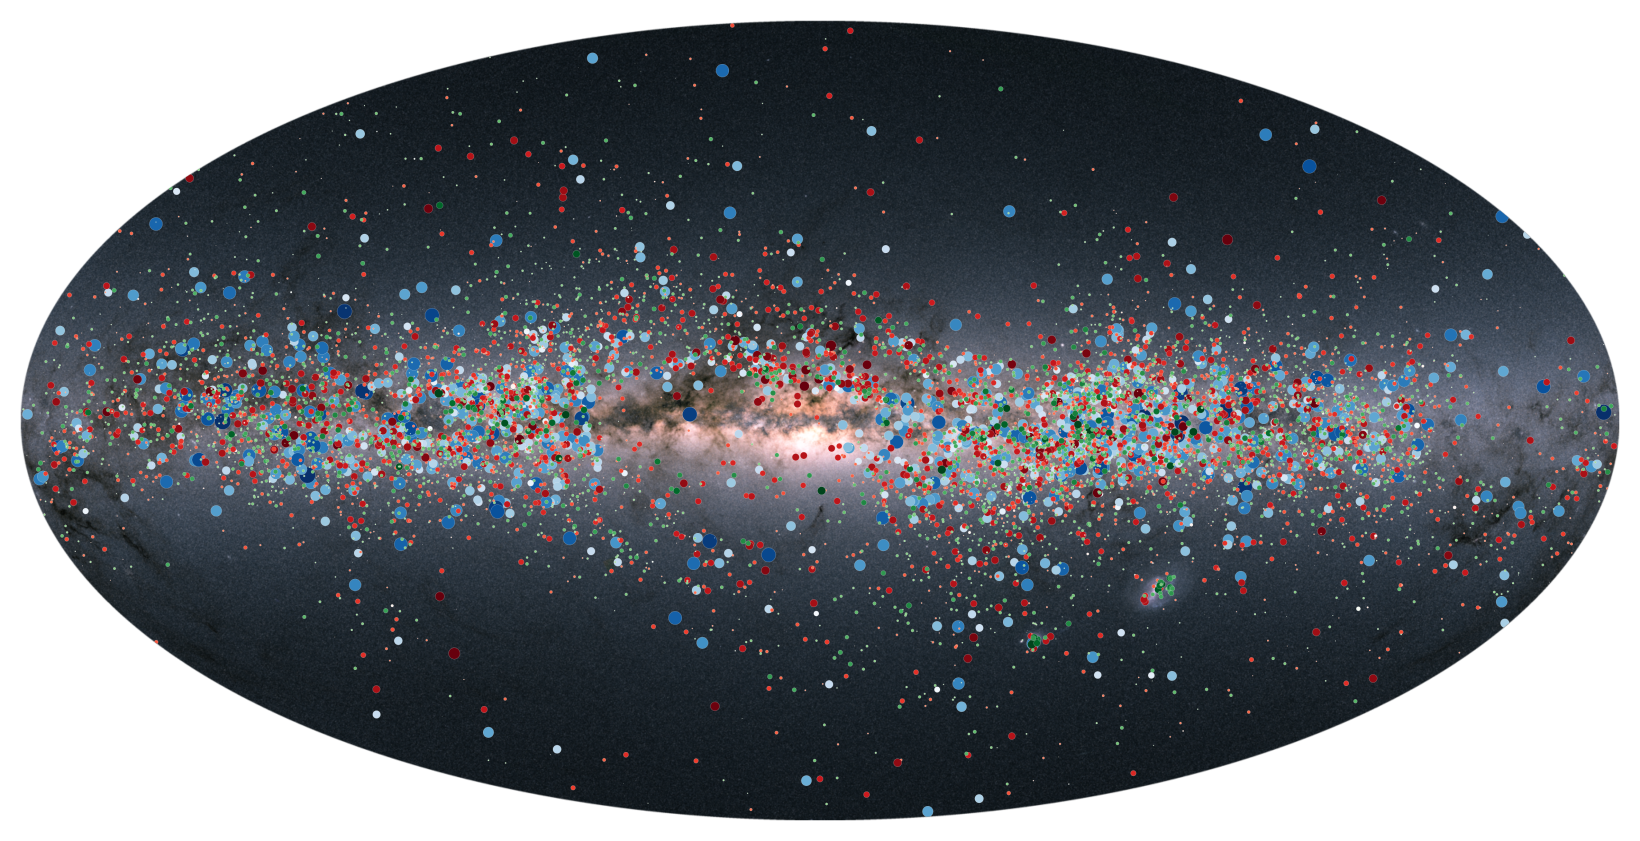 This image shows the plane of the Milky Way cutting horizontally across the frame, with many colourful dots overlaid – each representing a star. The dots are either red, green or blue, with the colour representing the star’s type and motion (the larger and darker the dot, the more the star’s velocity is changing throughout its cycle).